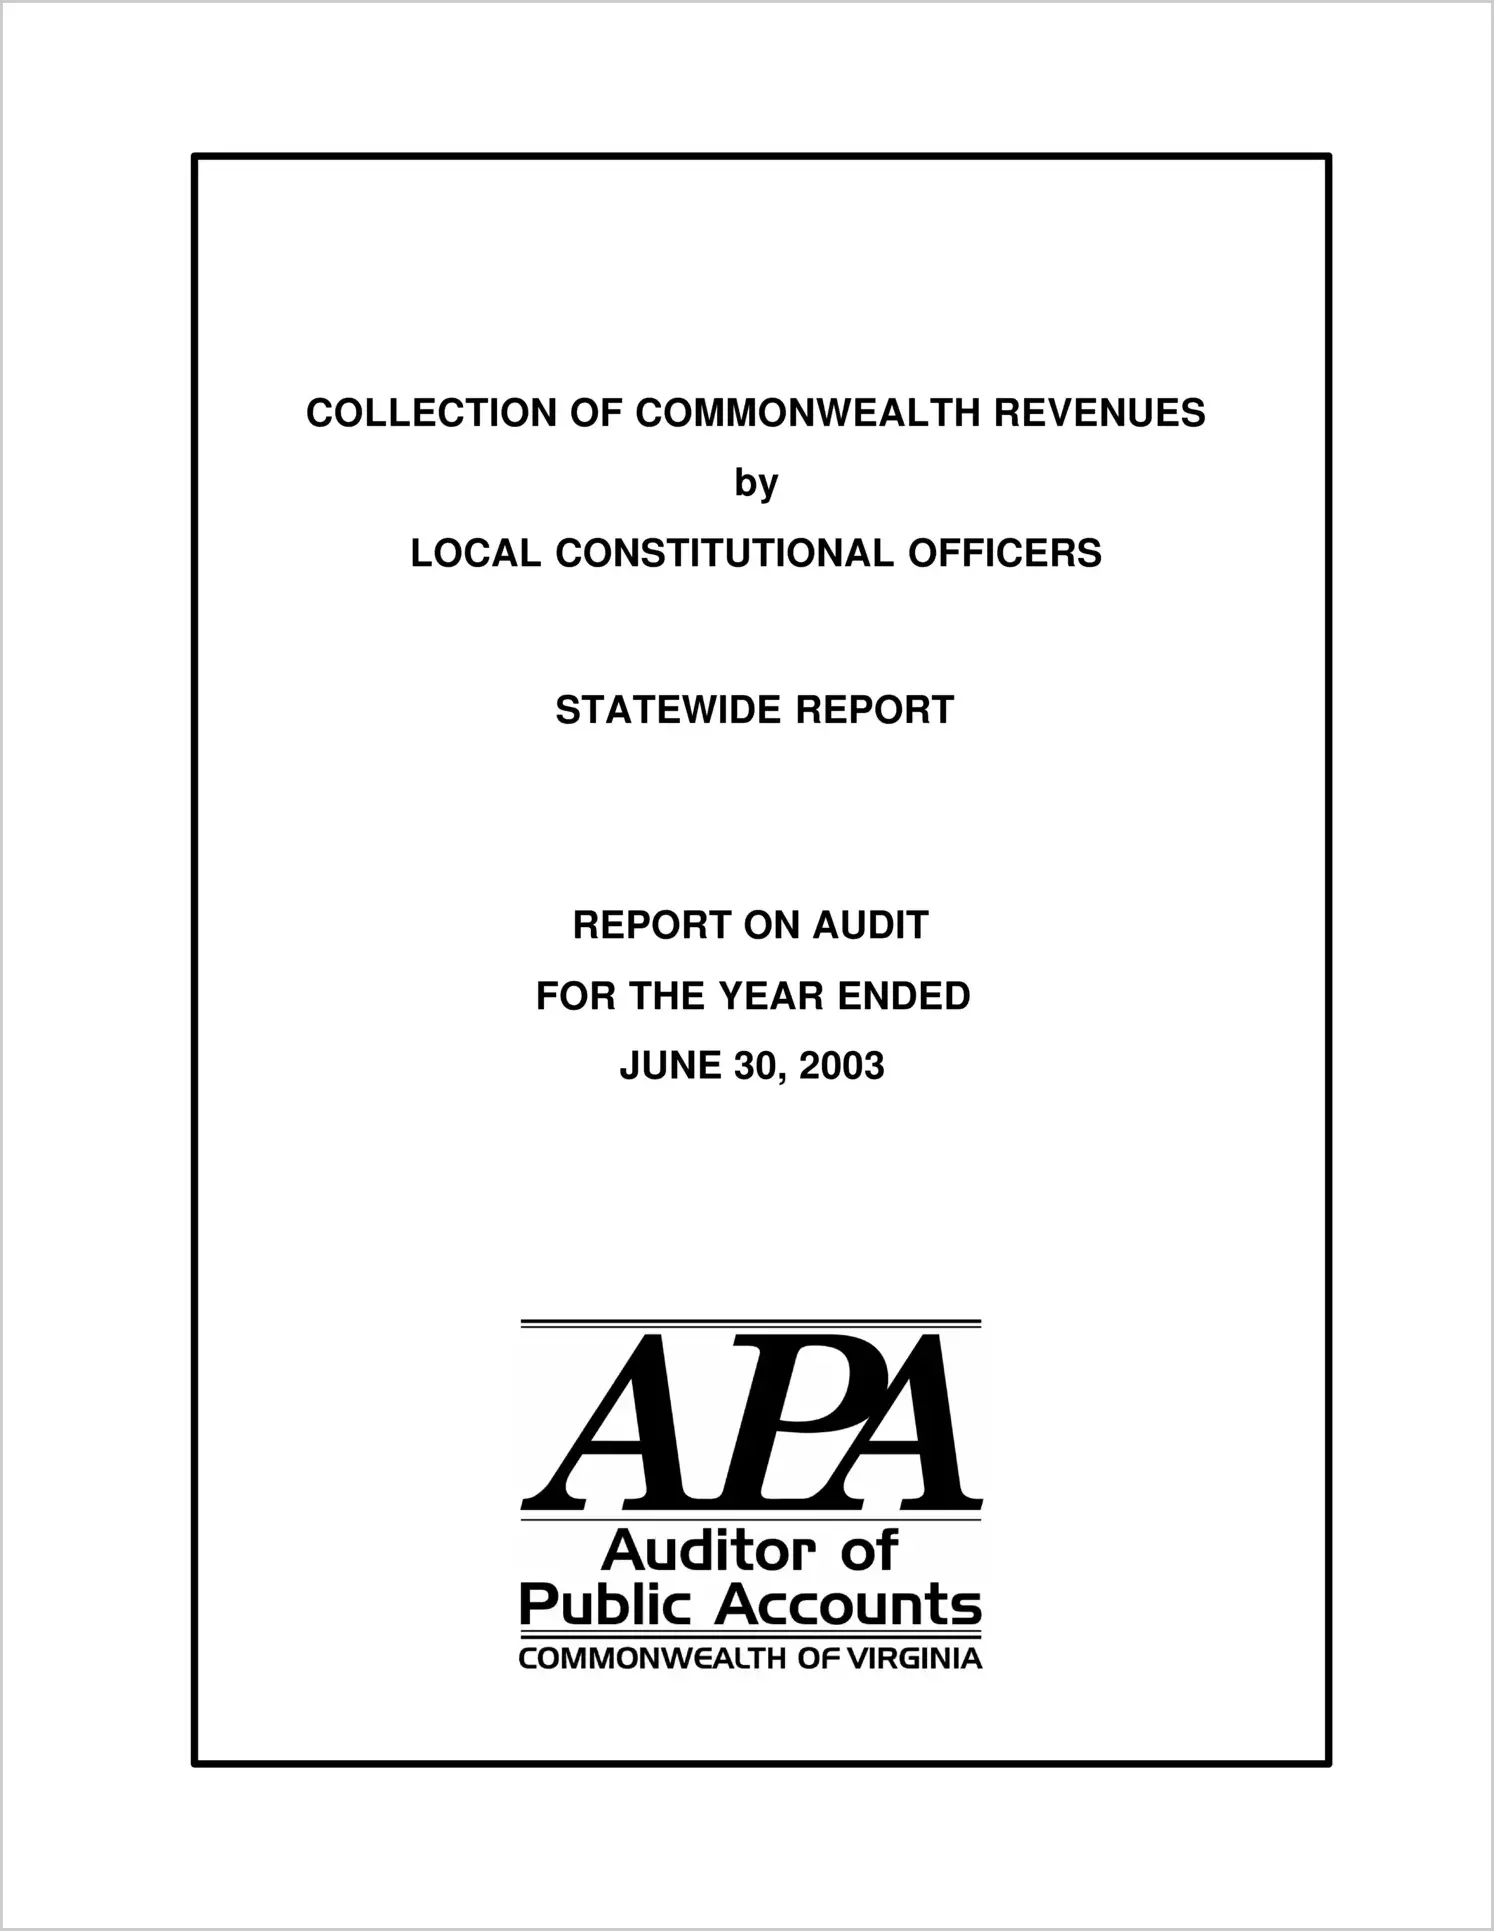 Collection of Commonwealth Revenues by Local Constitutional Officers Statewide Report for the year ended June 30, 2003